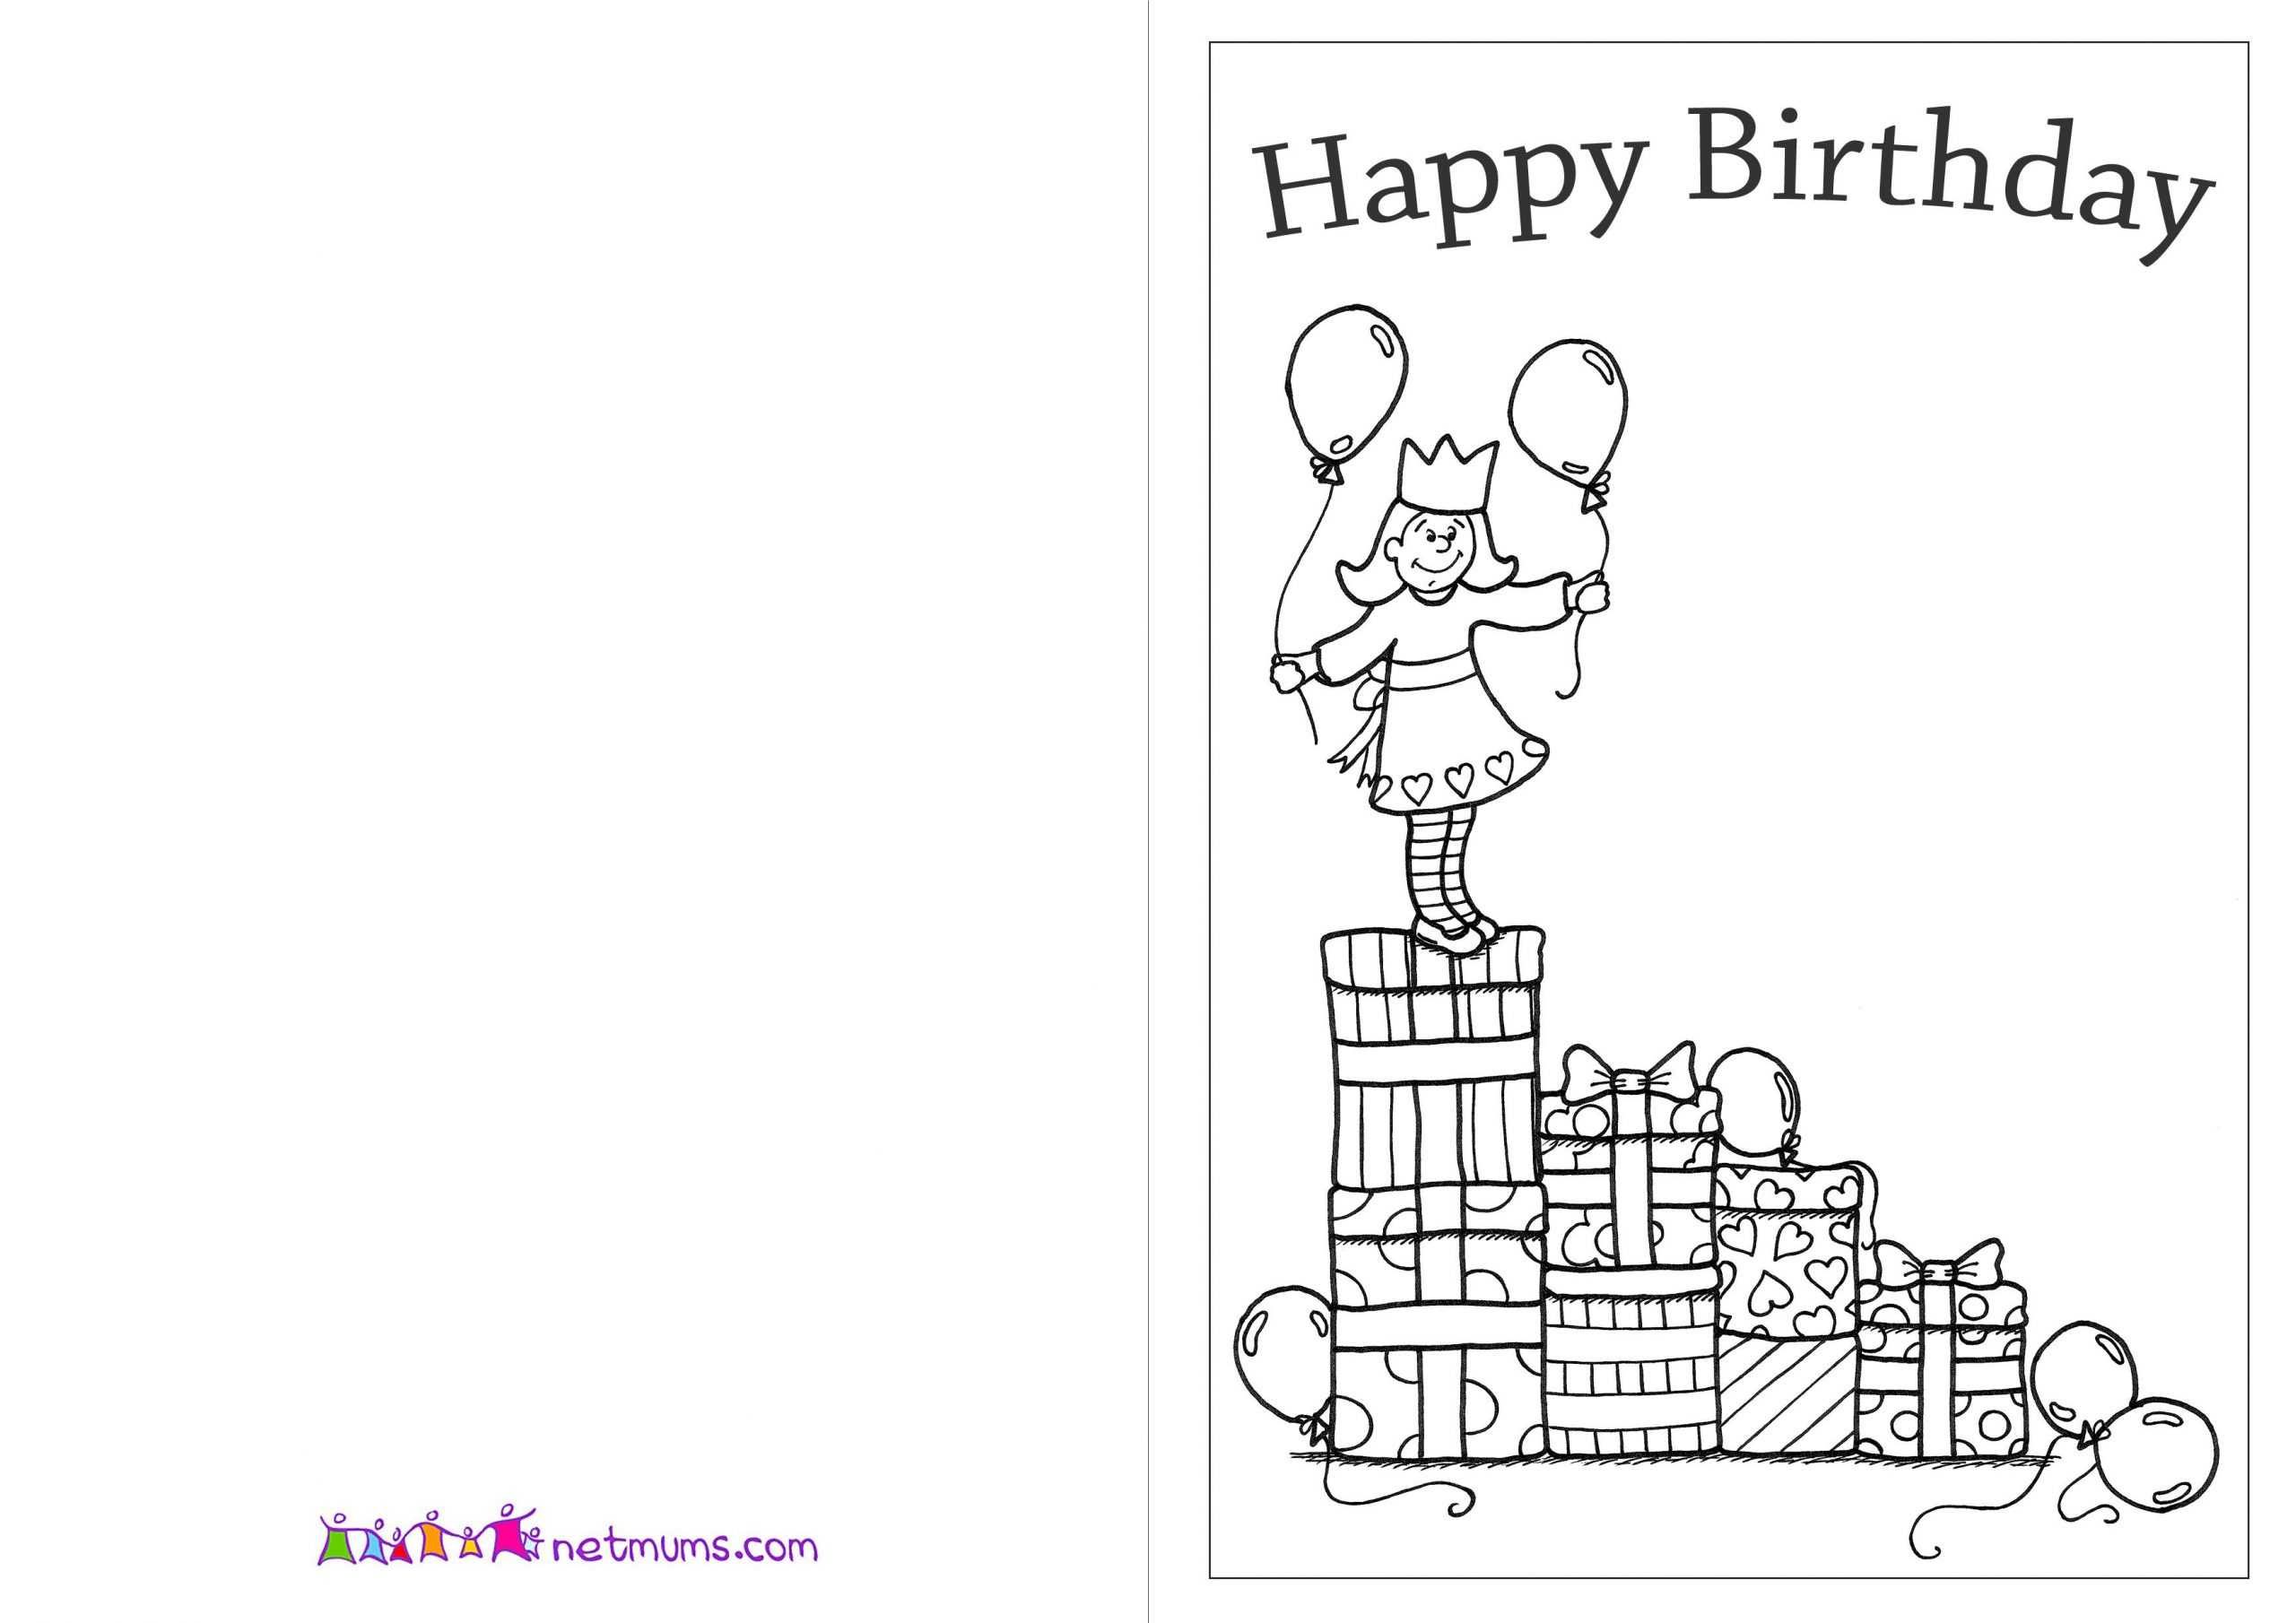 Coloring : Free Printable Coloring Birthday Card For Grandma Pertaining To Mom Birthday Card Template